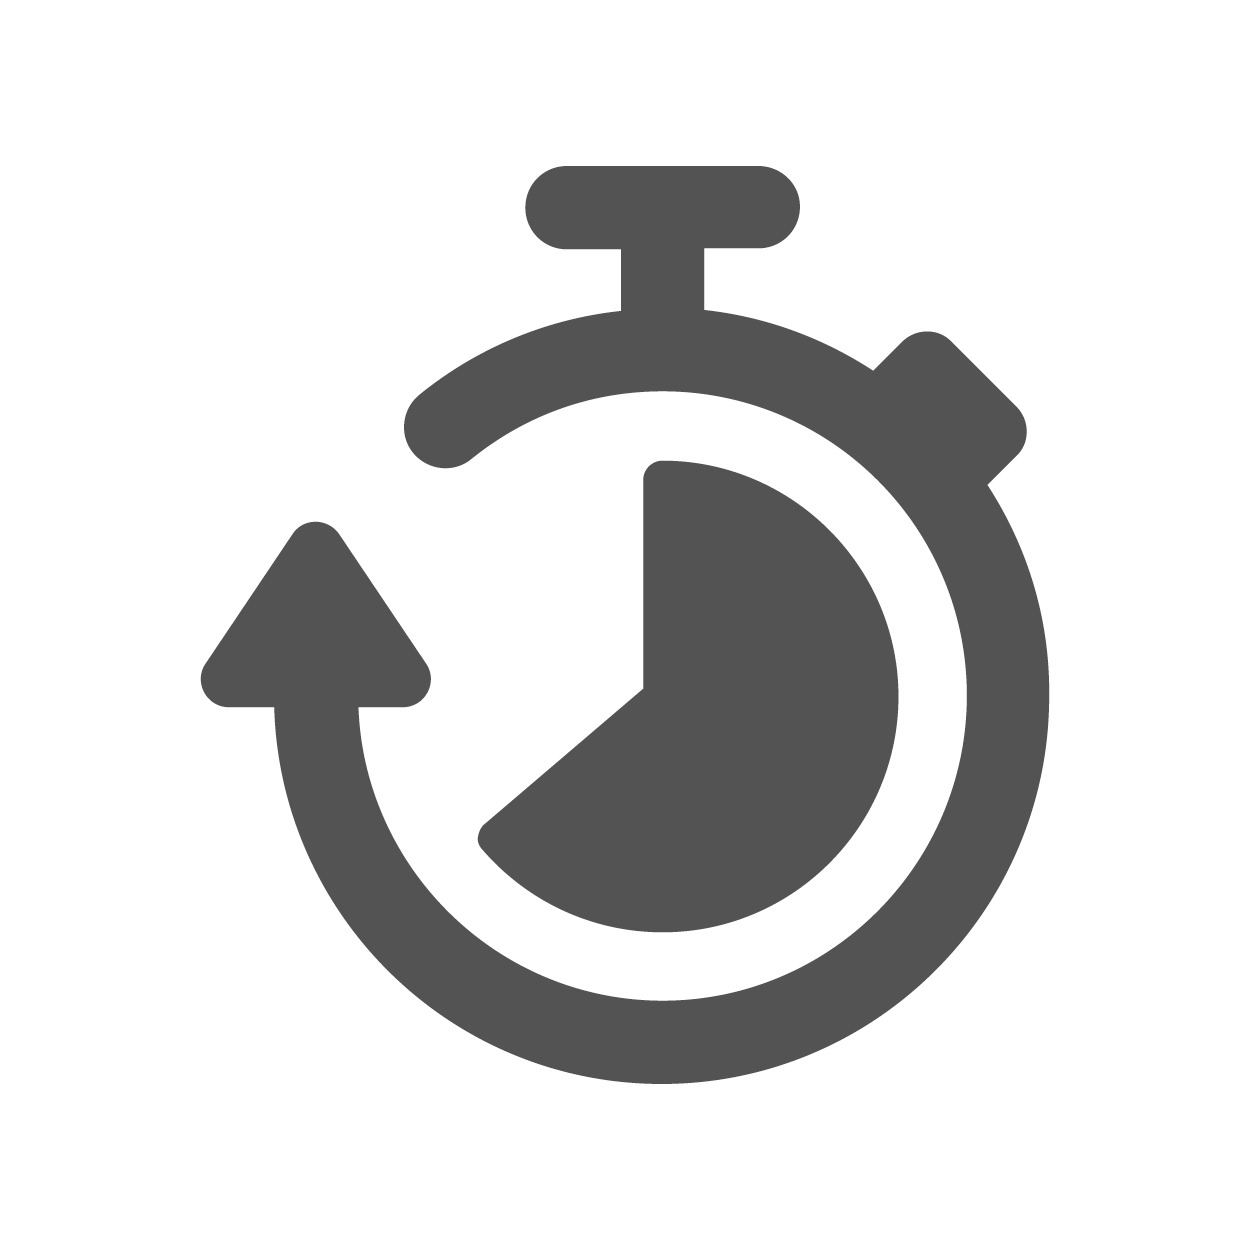 Graphic of clock by Adrien Coquet from the Noun Project